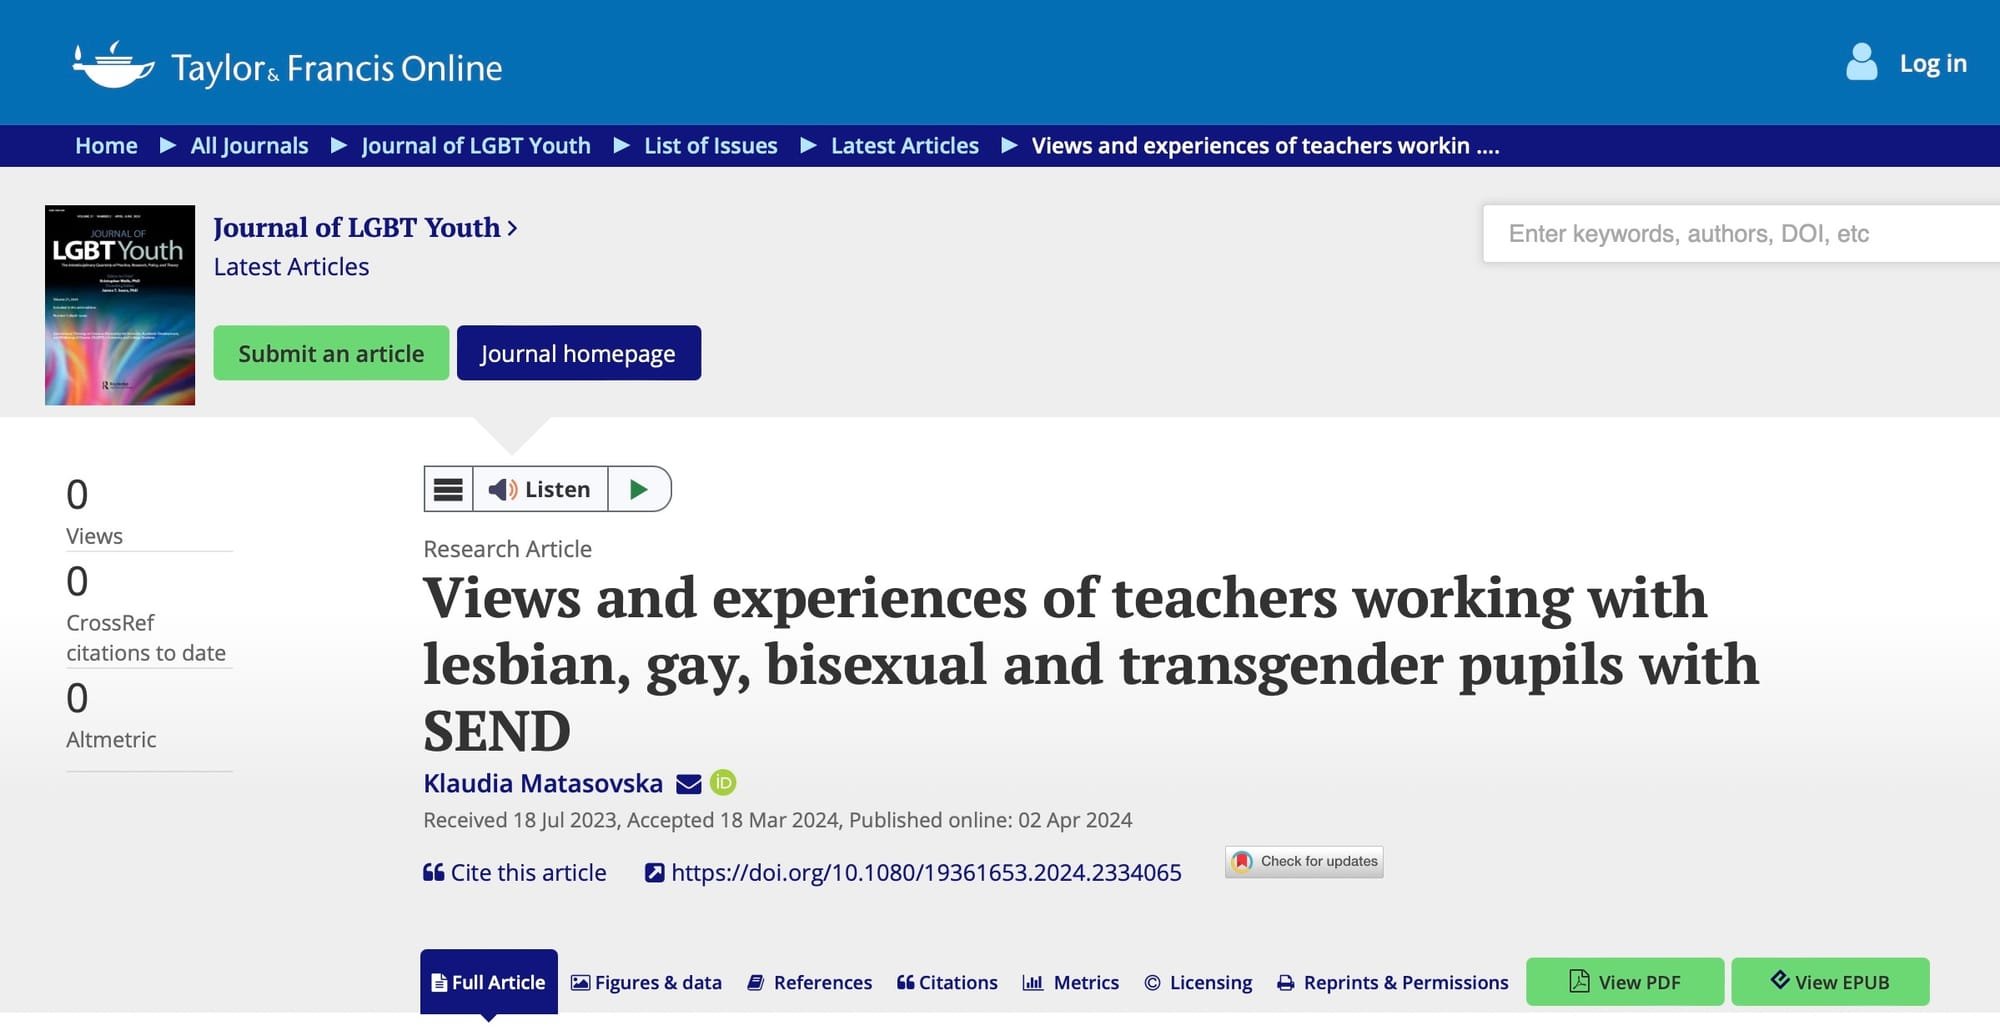 Views and Experiences of Teachers Working with Lesbian, Gay, Bisexual and Transgender Pupils with SEND